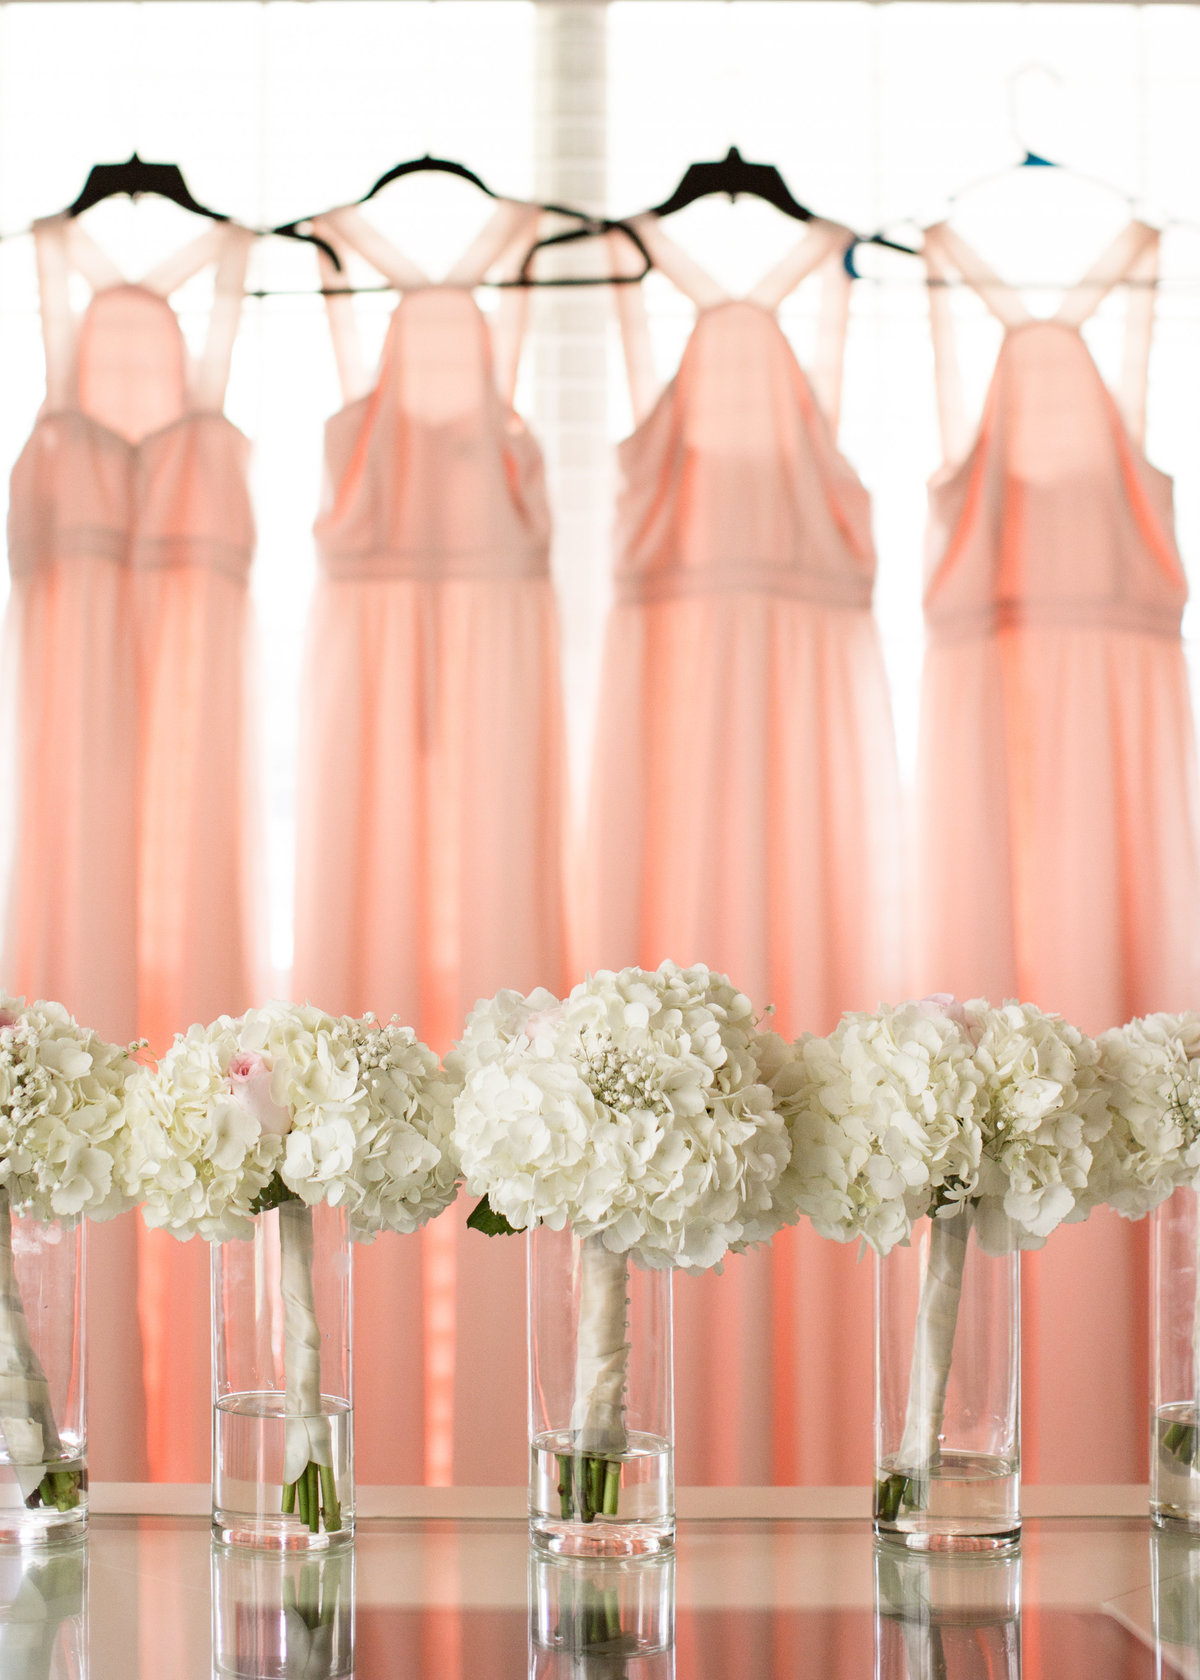 The bridesmaids dresses and flowers hang for a detail photo.